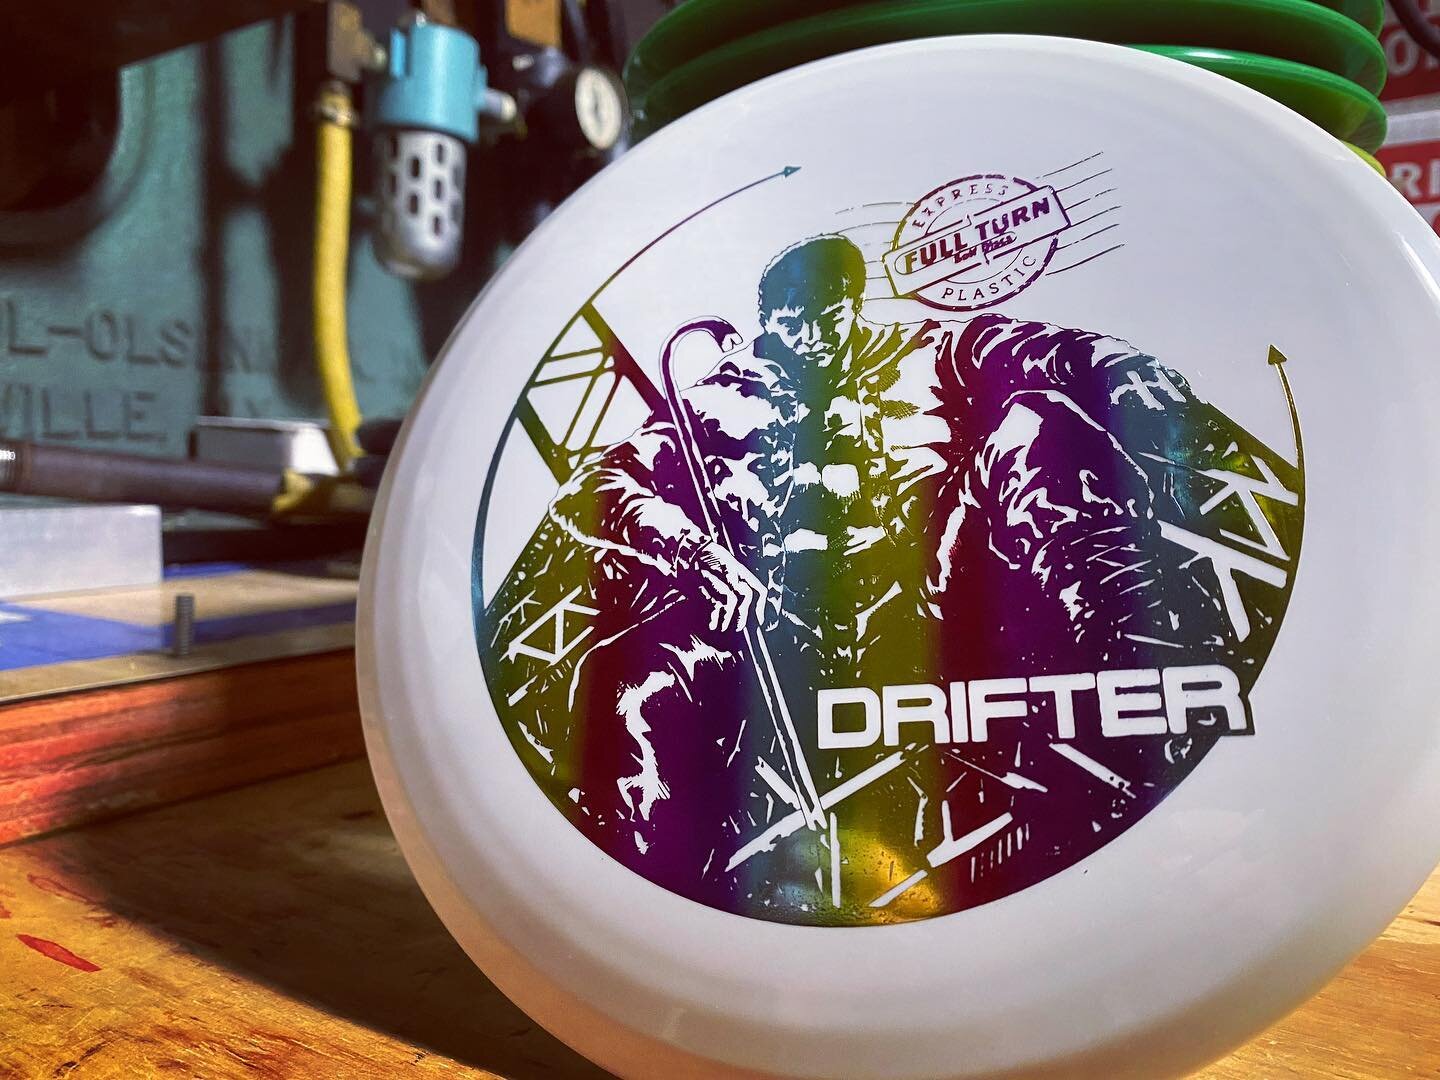 We&rsquo;re bringing back this classic stamp for our Express Drifters. What do you think? 

#fullturndiscs #prodiscus #gatewaydiscsports #throwback #drifter #discgolf #discgolflife #discgolfeveryday #discgolfshoutouts #discgolfdaily #discgolfart #dis